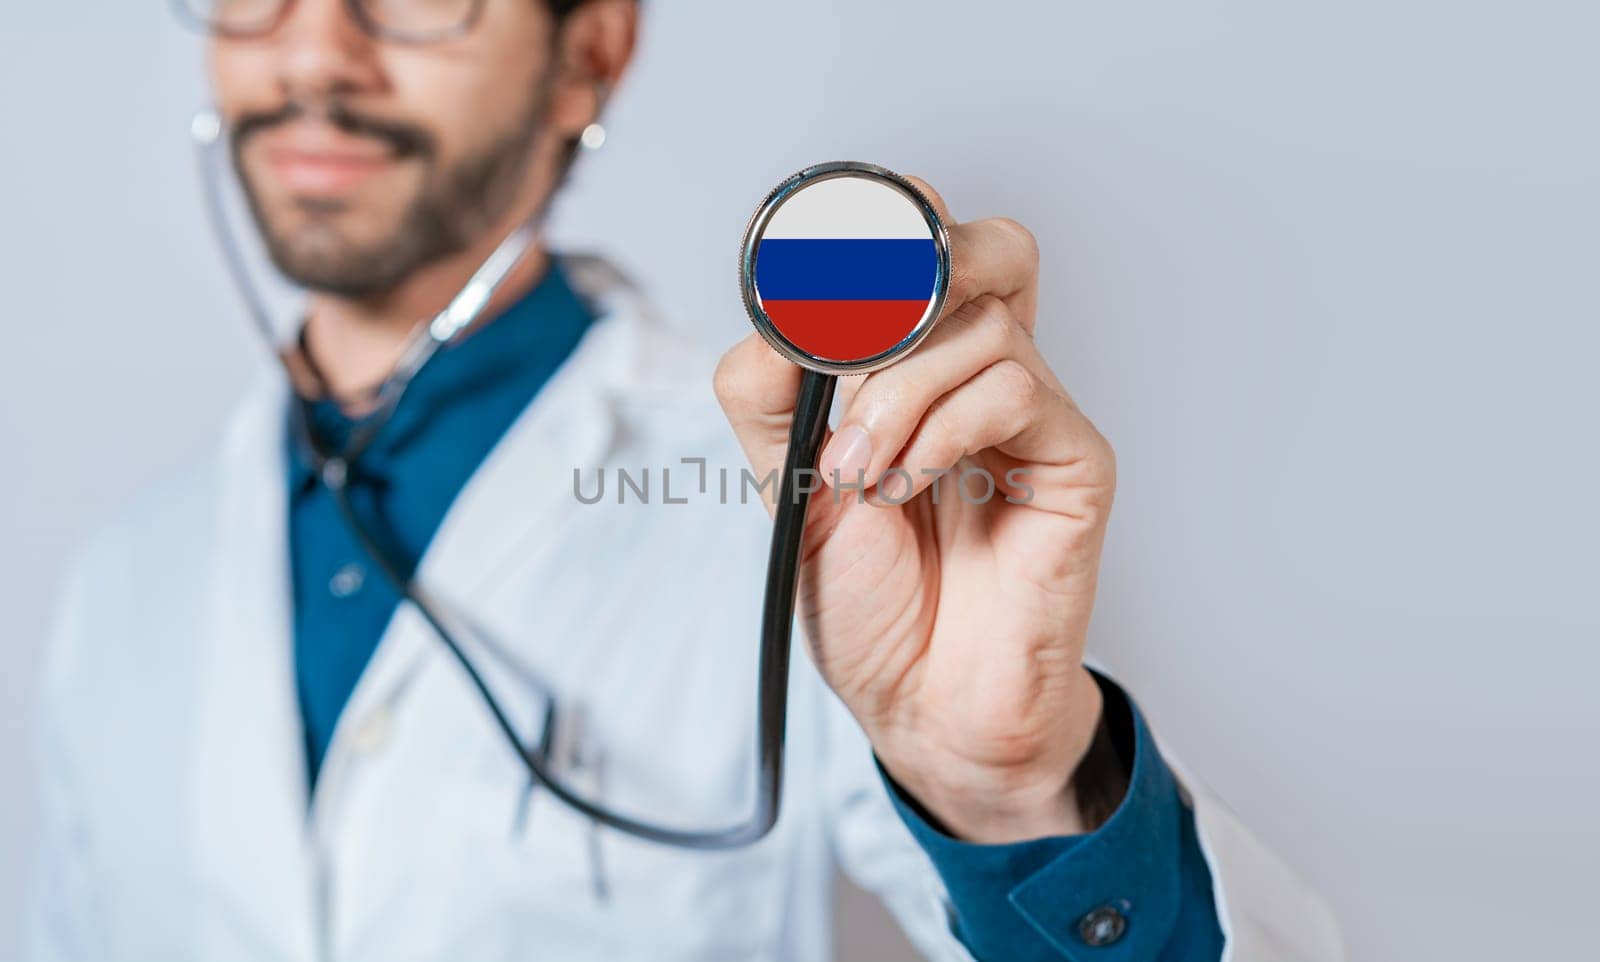 Russia flag on stethoscope. Doctor holding stethoscope with flag of Russia. Doctor showing stethoscope with flag of Russian Federation by isaiphoto